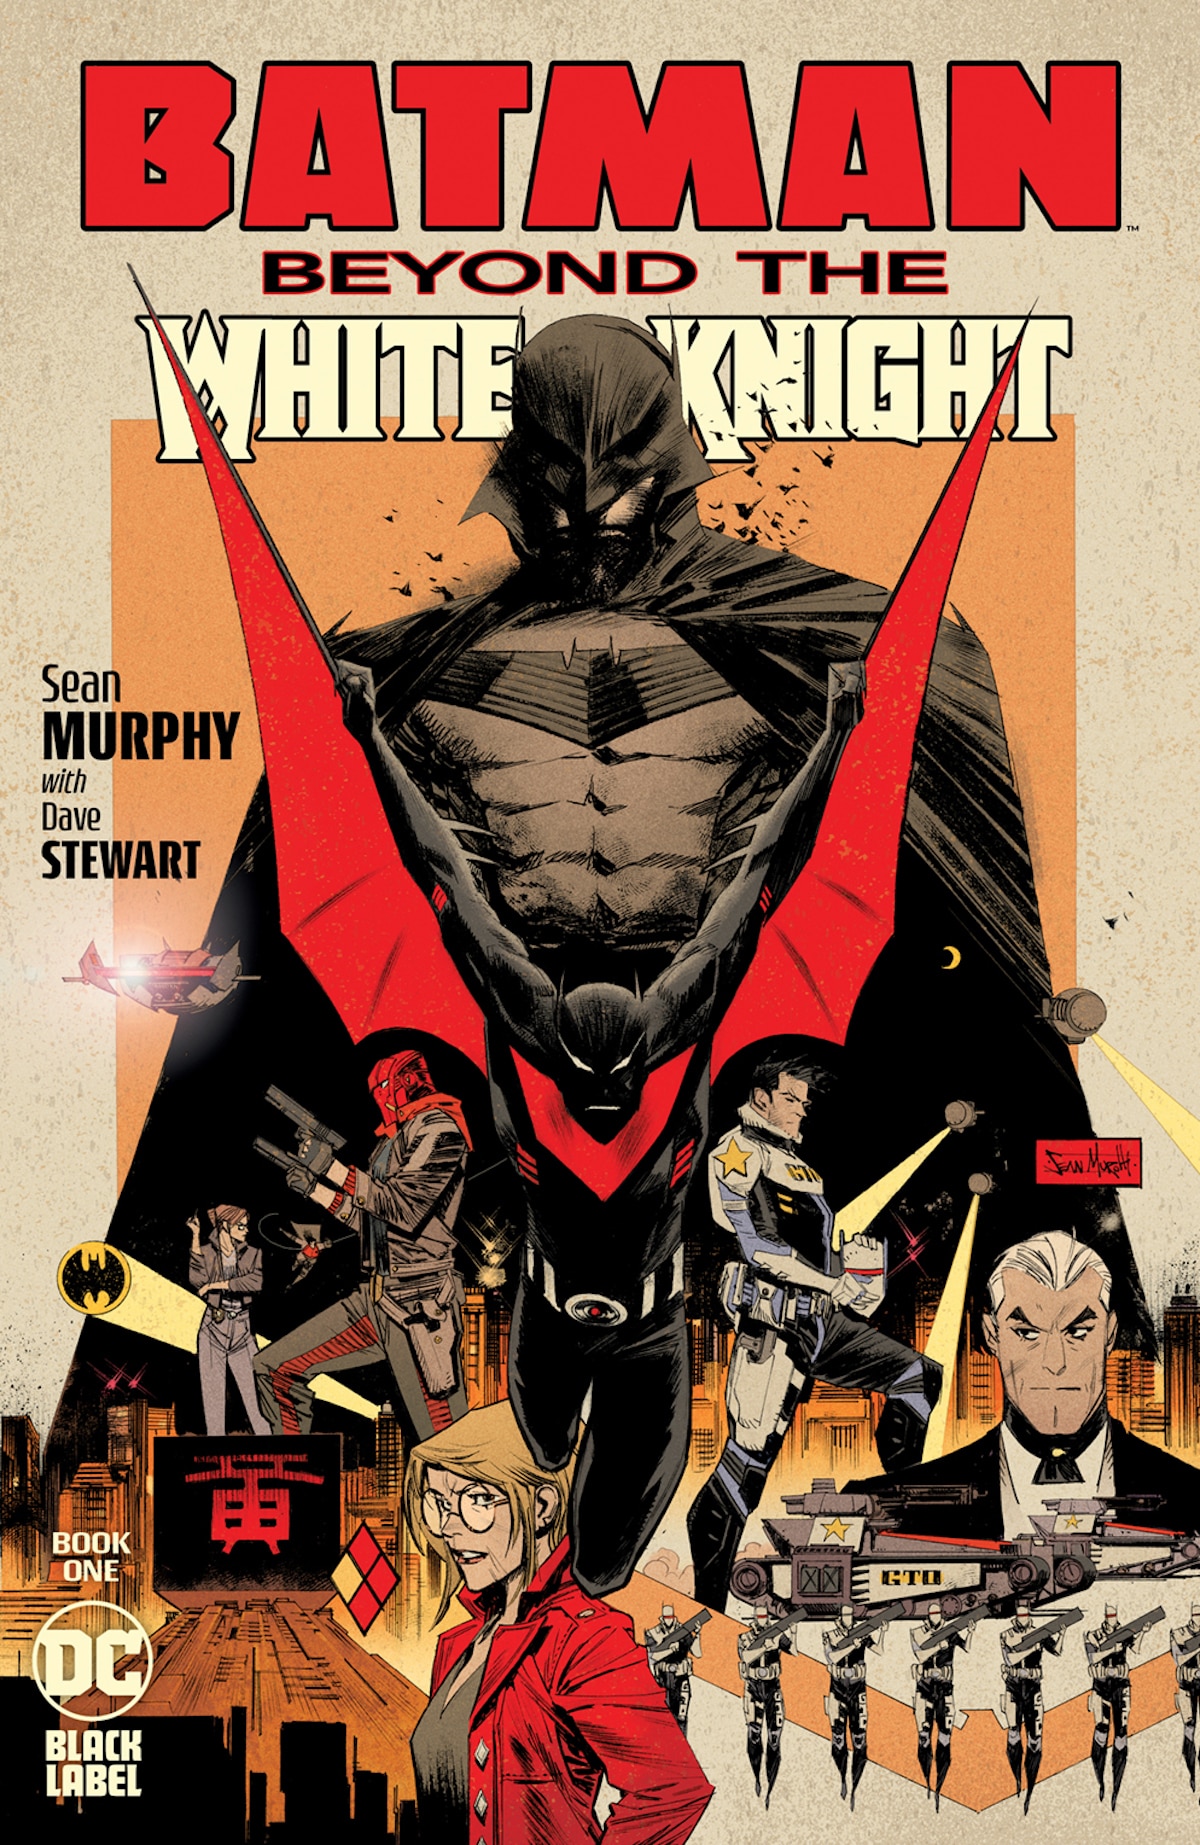 DC Reveals the Official Comic Prequel to the Gotham Knights Game!